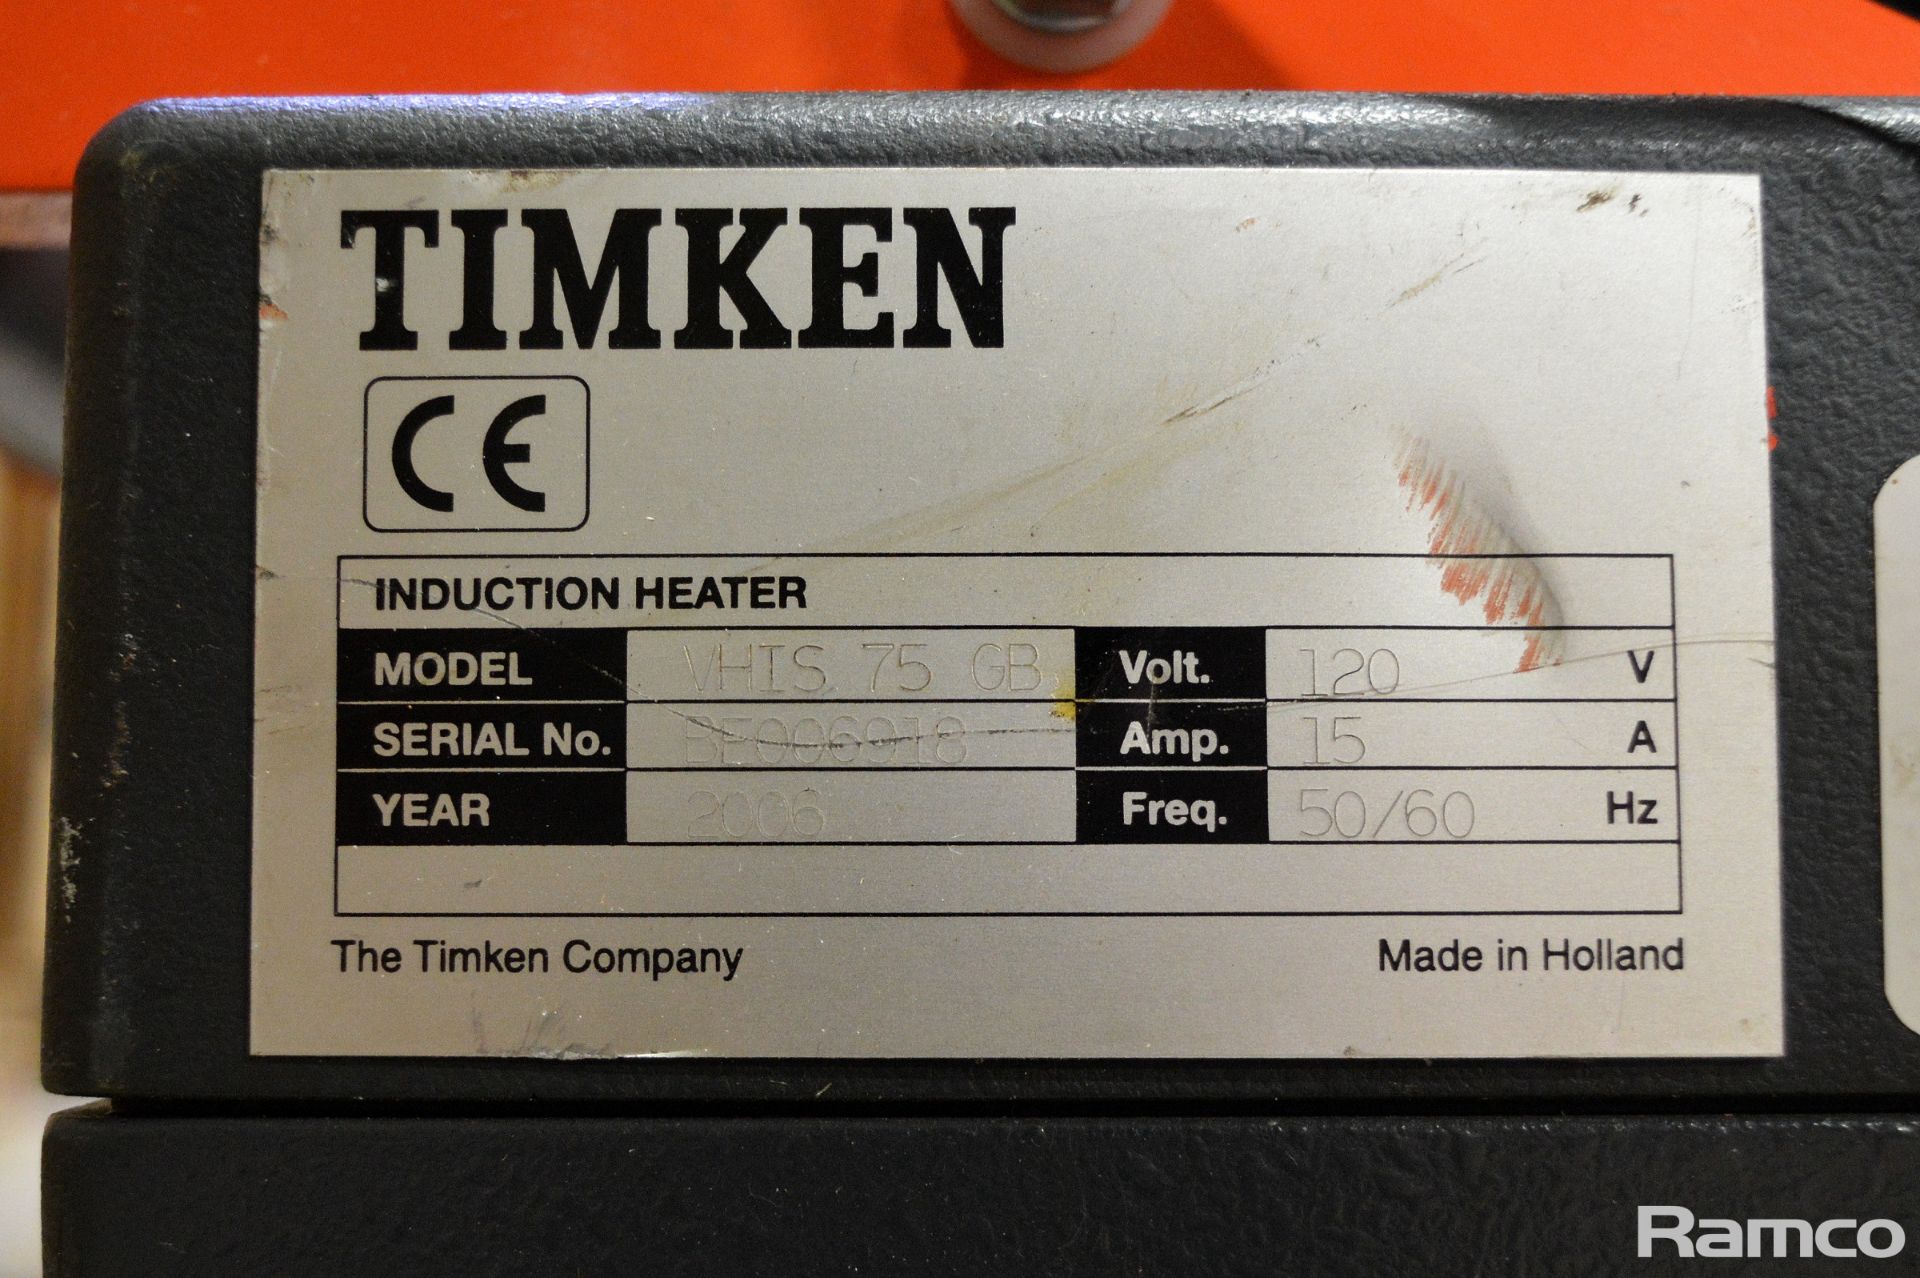 Kollmann Pipe And Drain Cleaning Equipment & Timken VHIS 75 GB Induction Heater Unit - 110v - Image 5 of 5